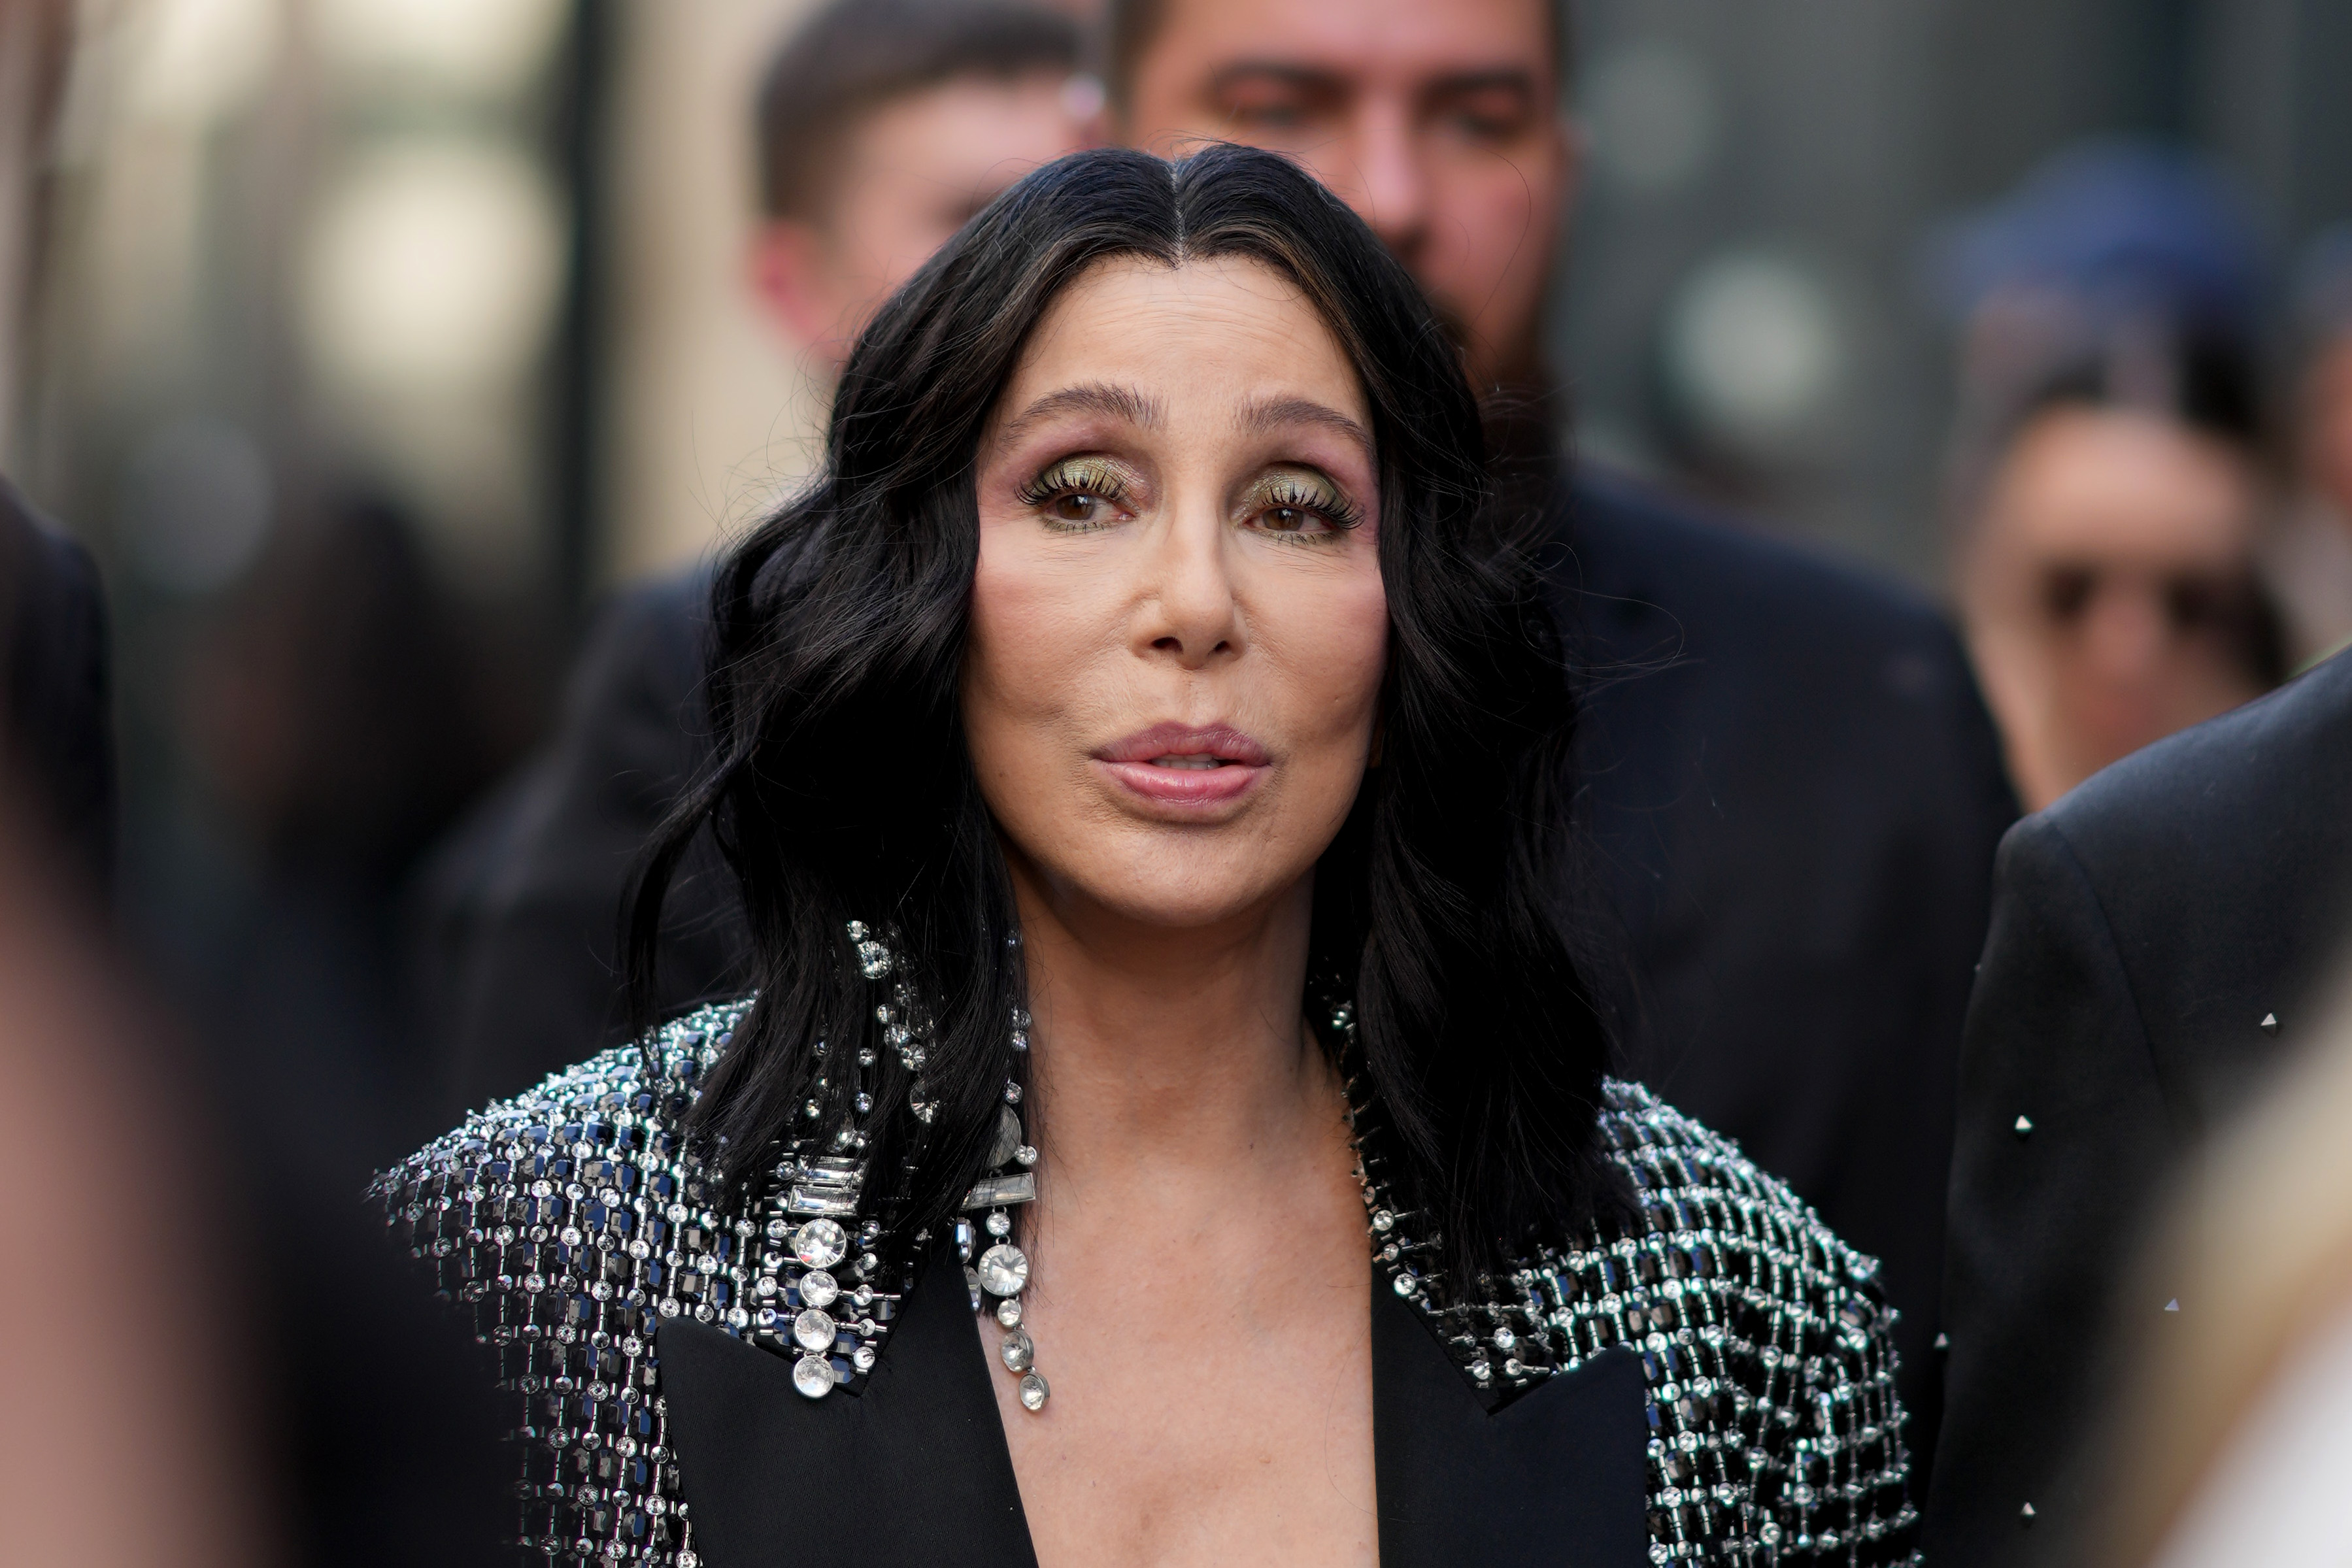 Cher underwent court proceedings at the beginning of the year regarding her son